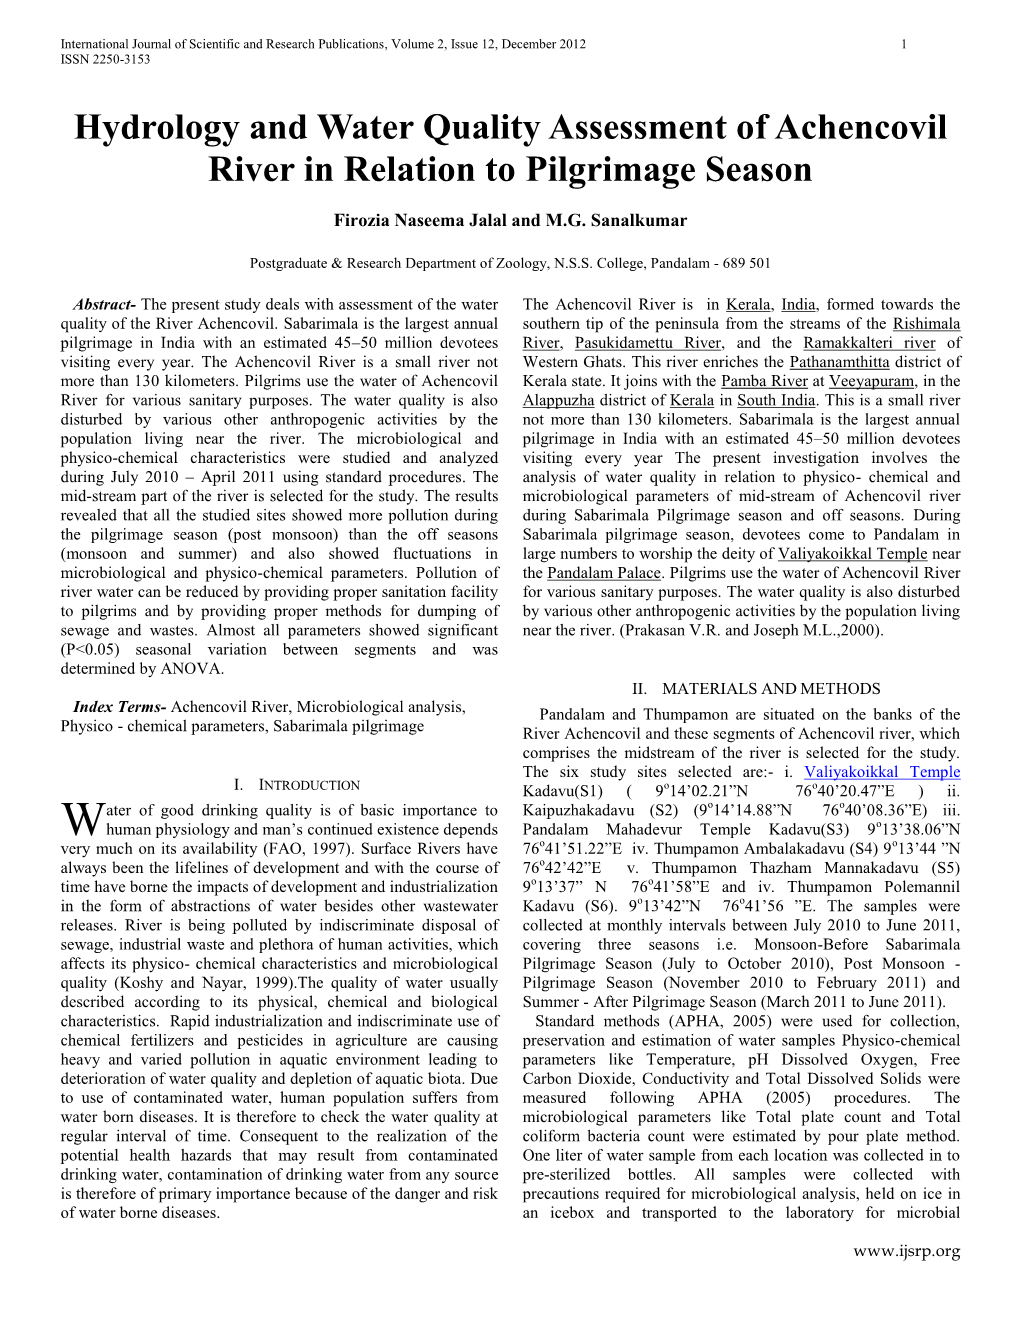 Hydrology and Water Quality Assessment of Achencovil River in Relation to Pilgrimage Season